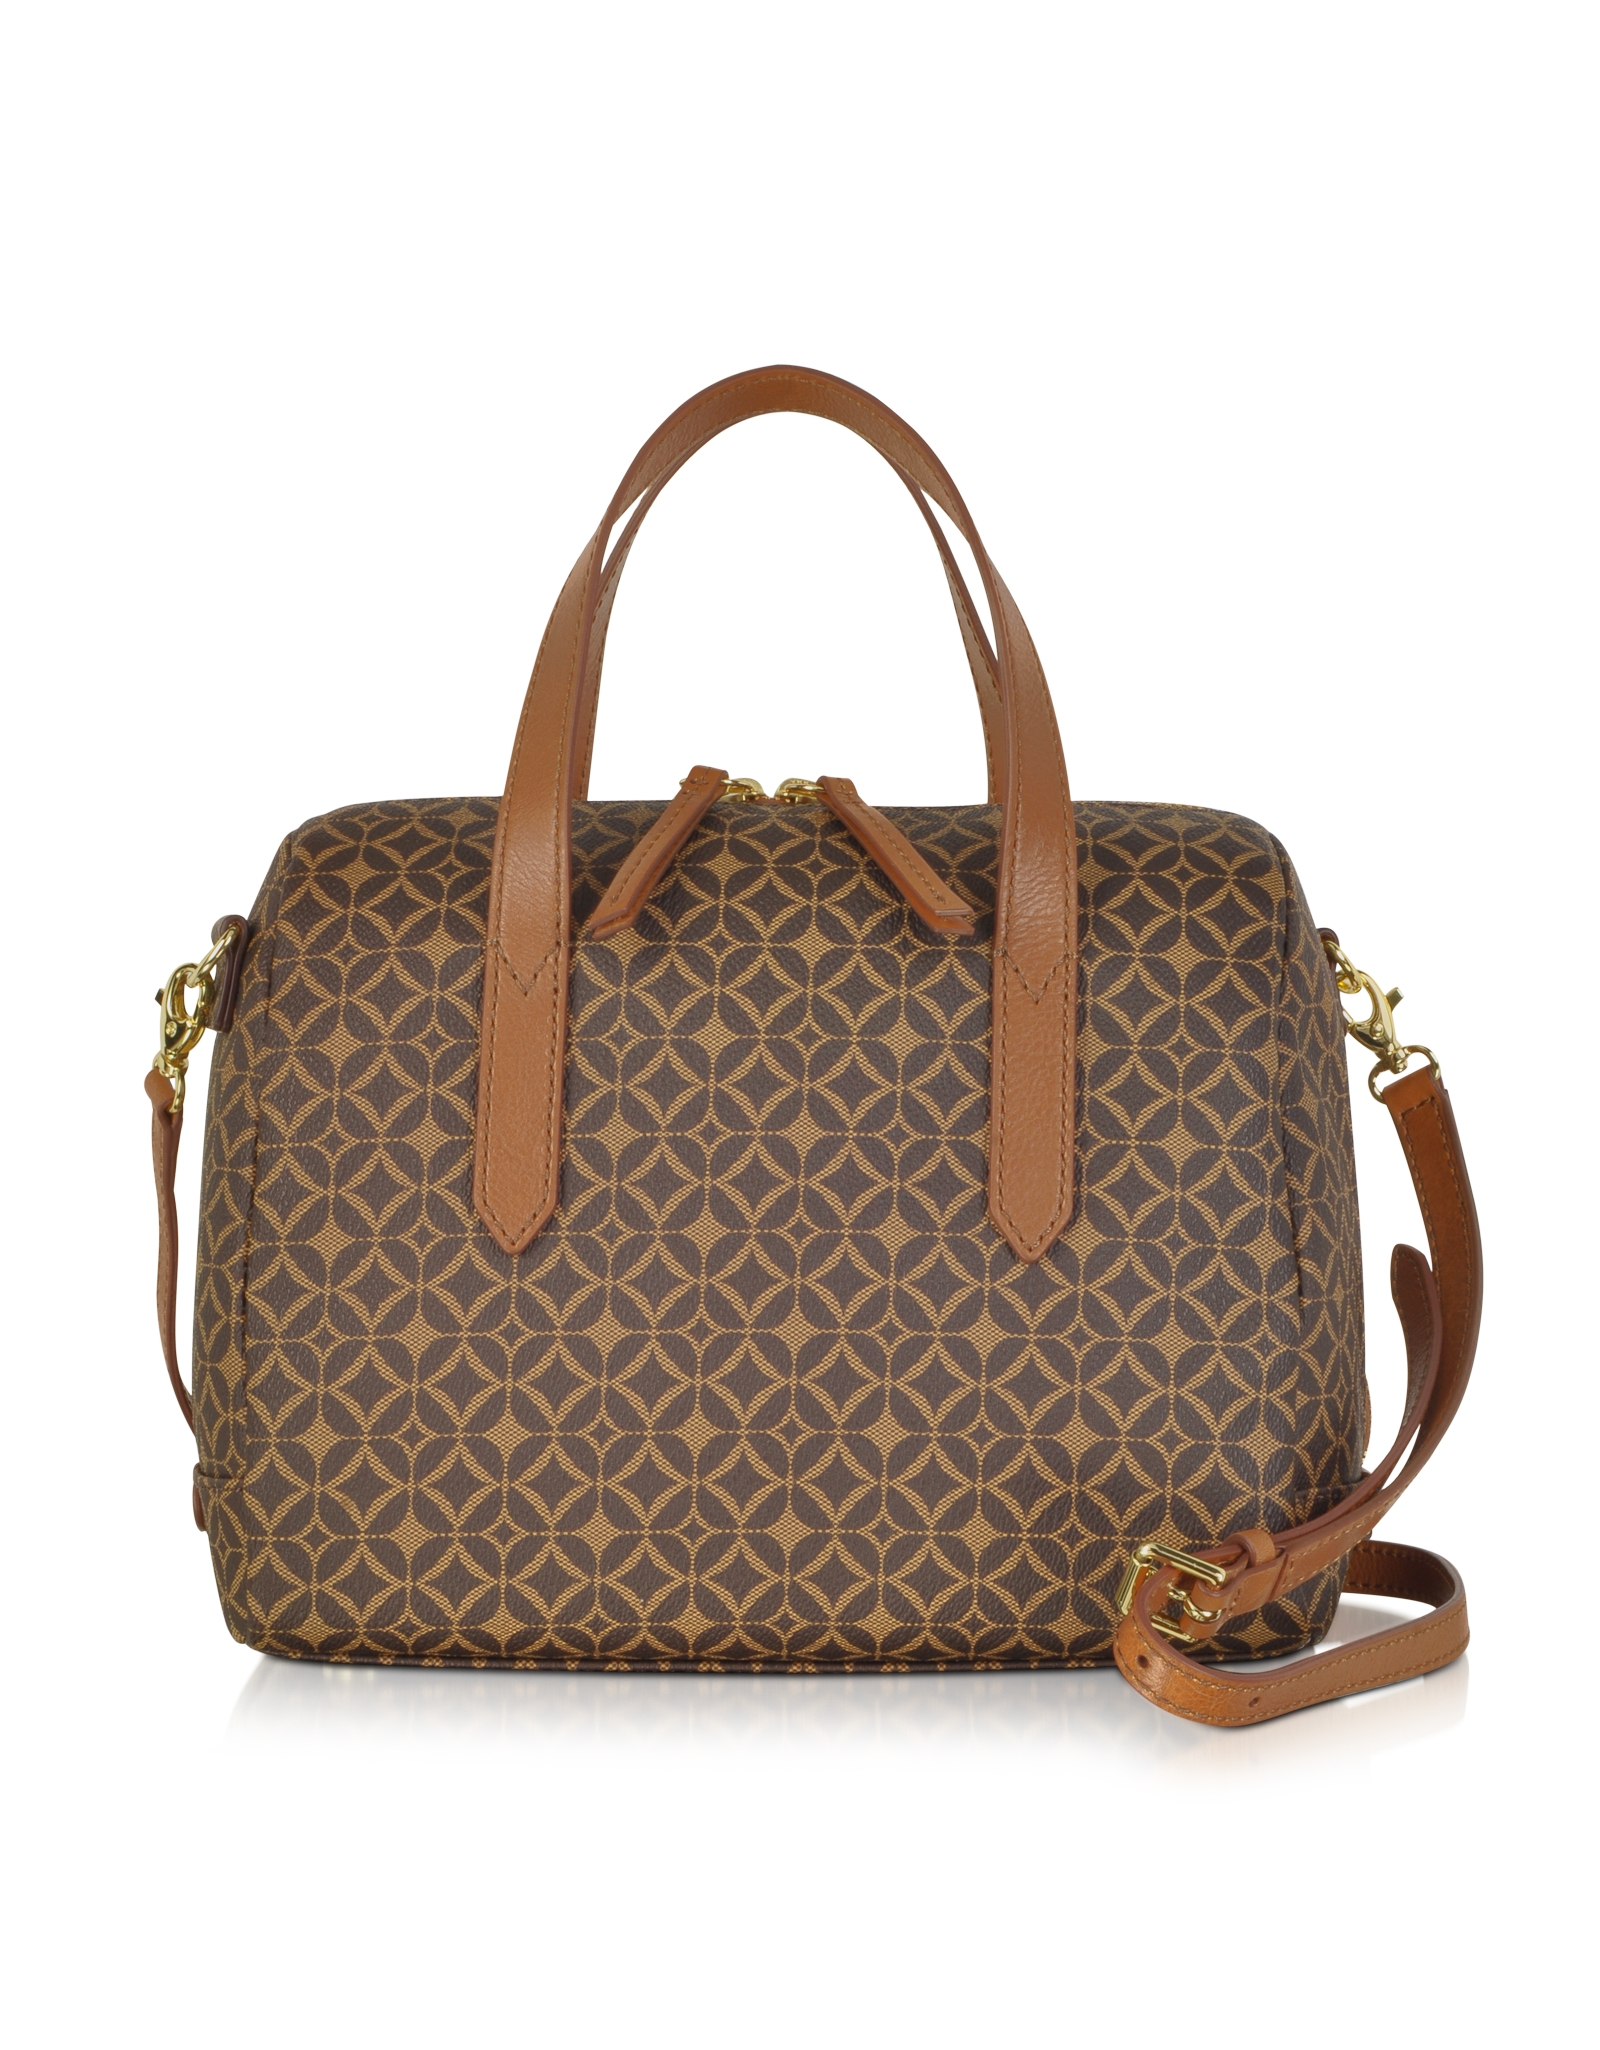 Lyst - Fossil Sydney Signature Satchel in Brown